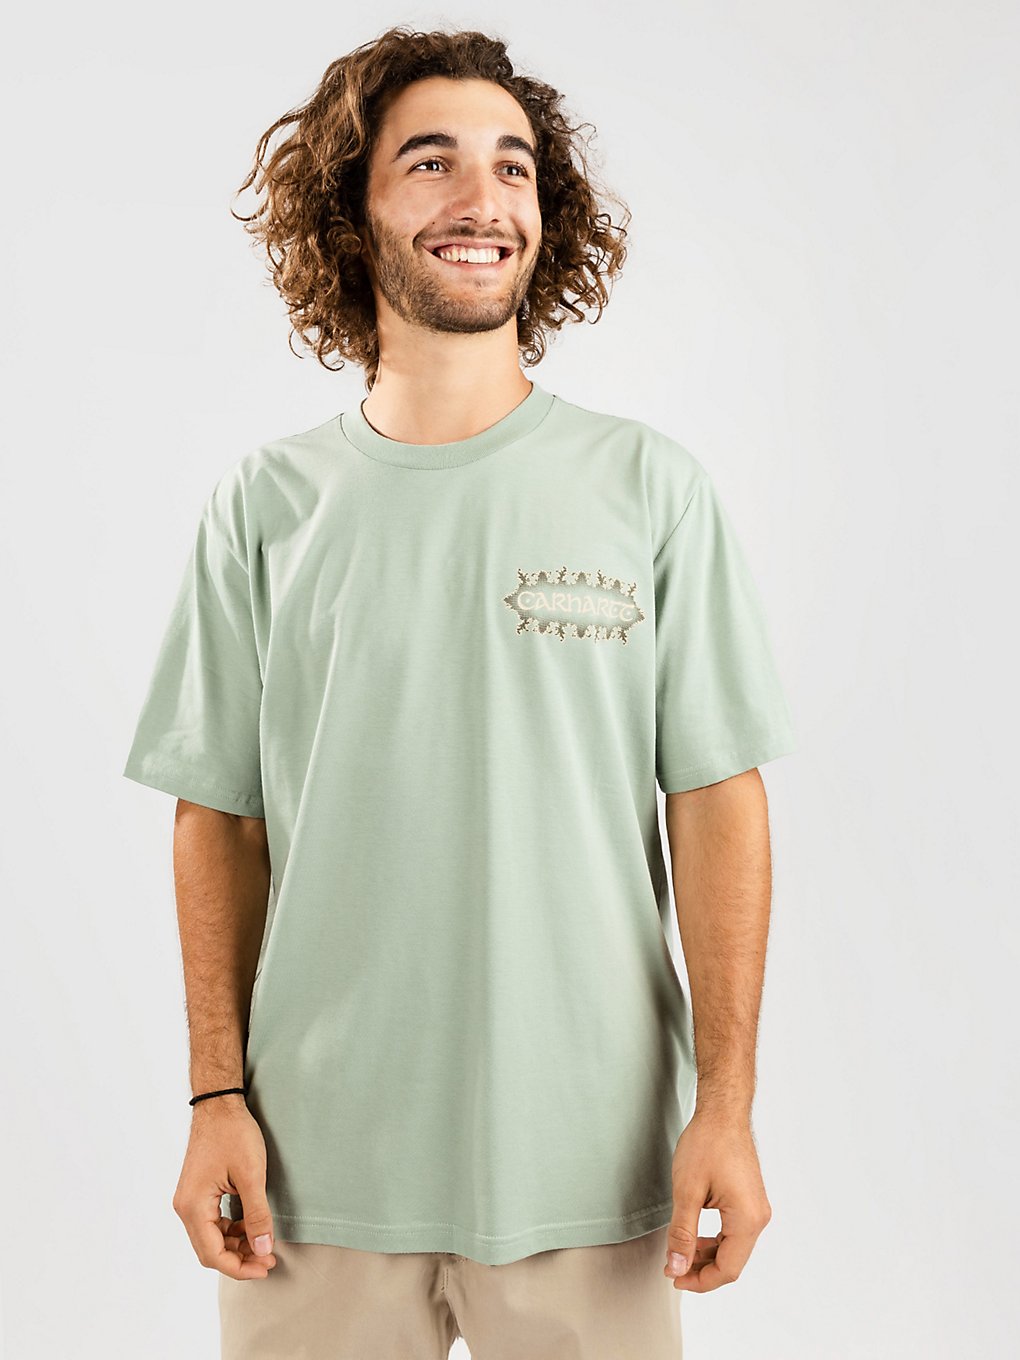 Carhartt WIP Spaces T-Shirt misty sage